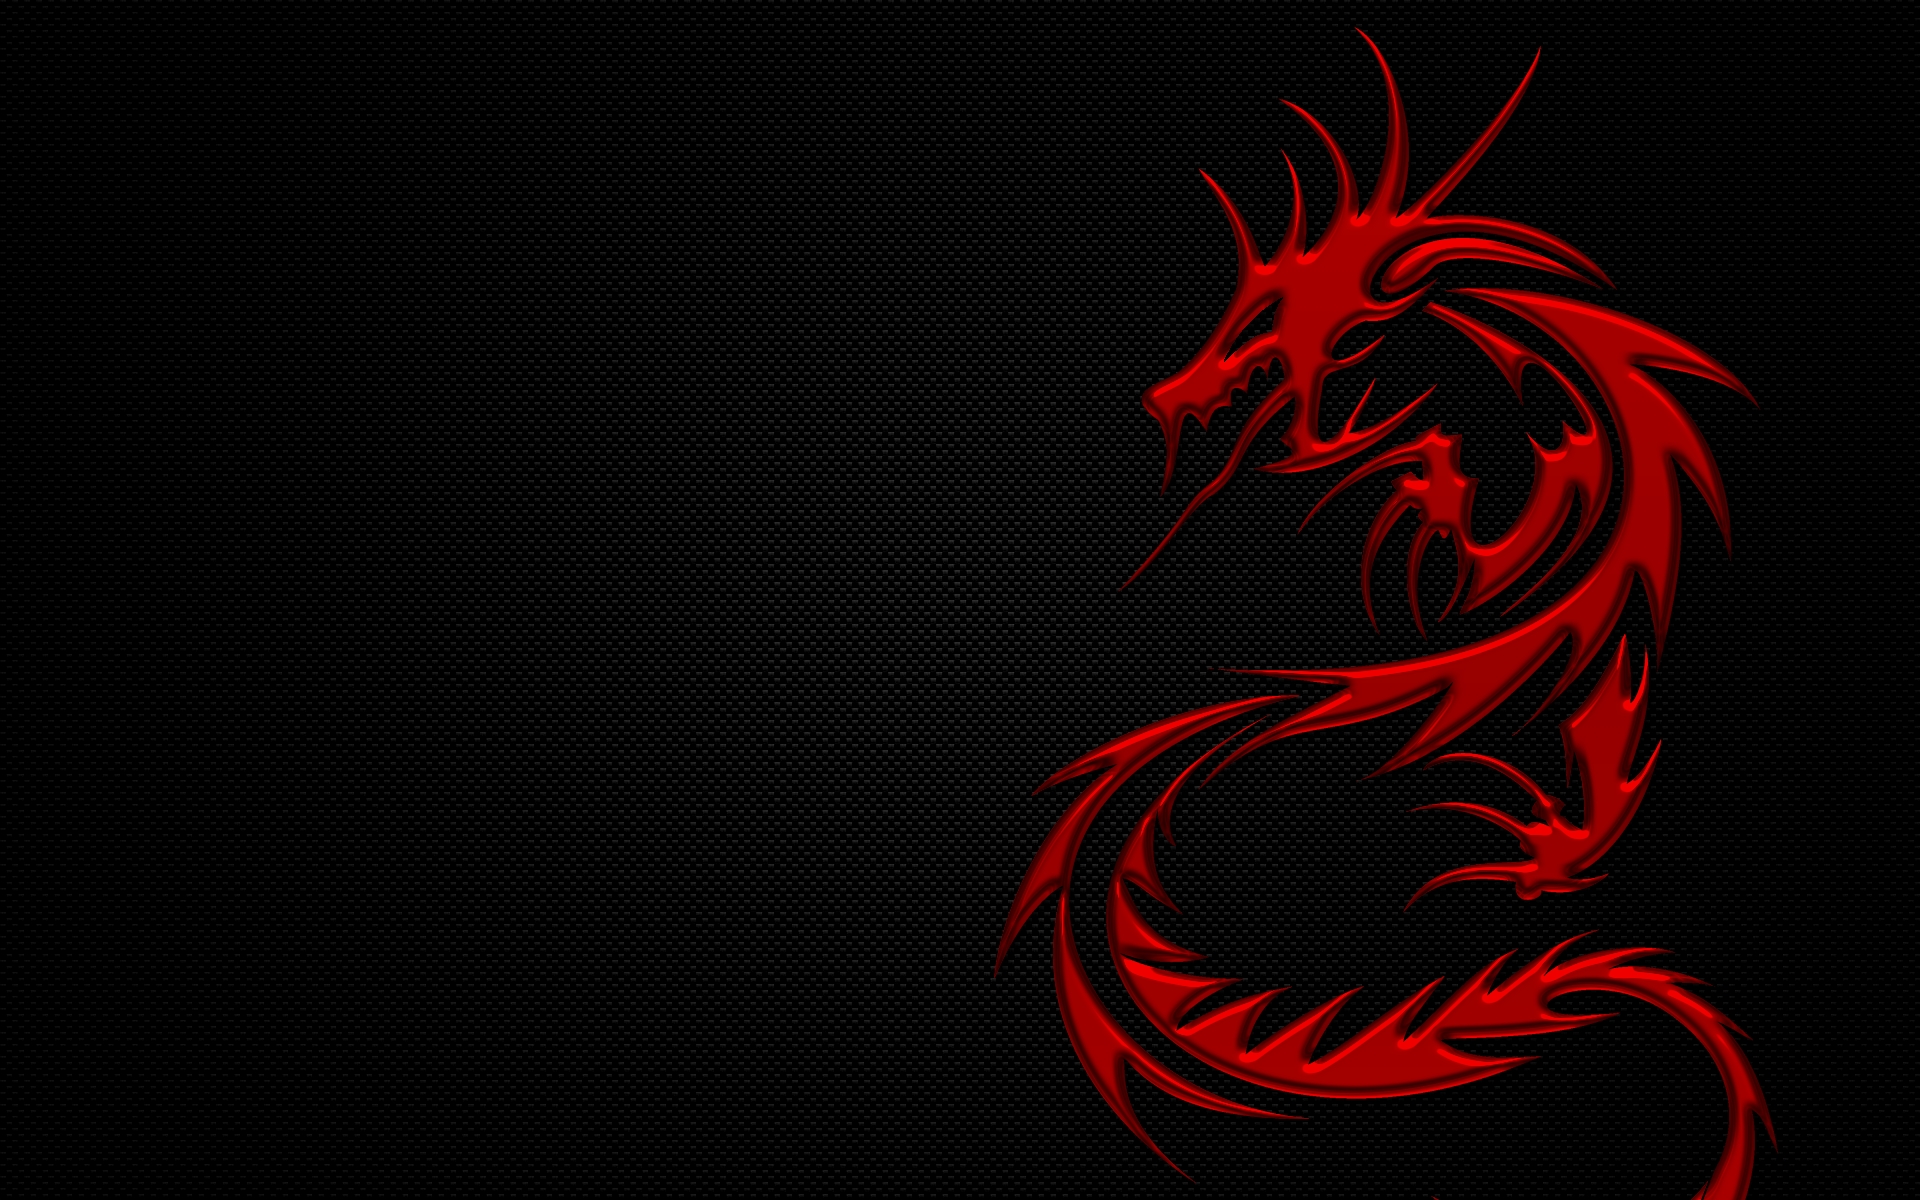 Red Dragon by wraithevolution on